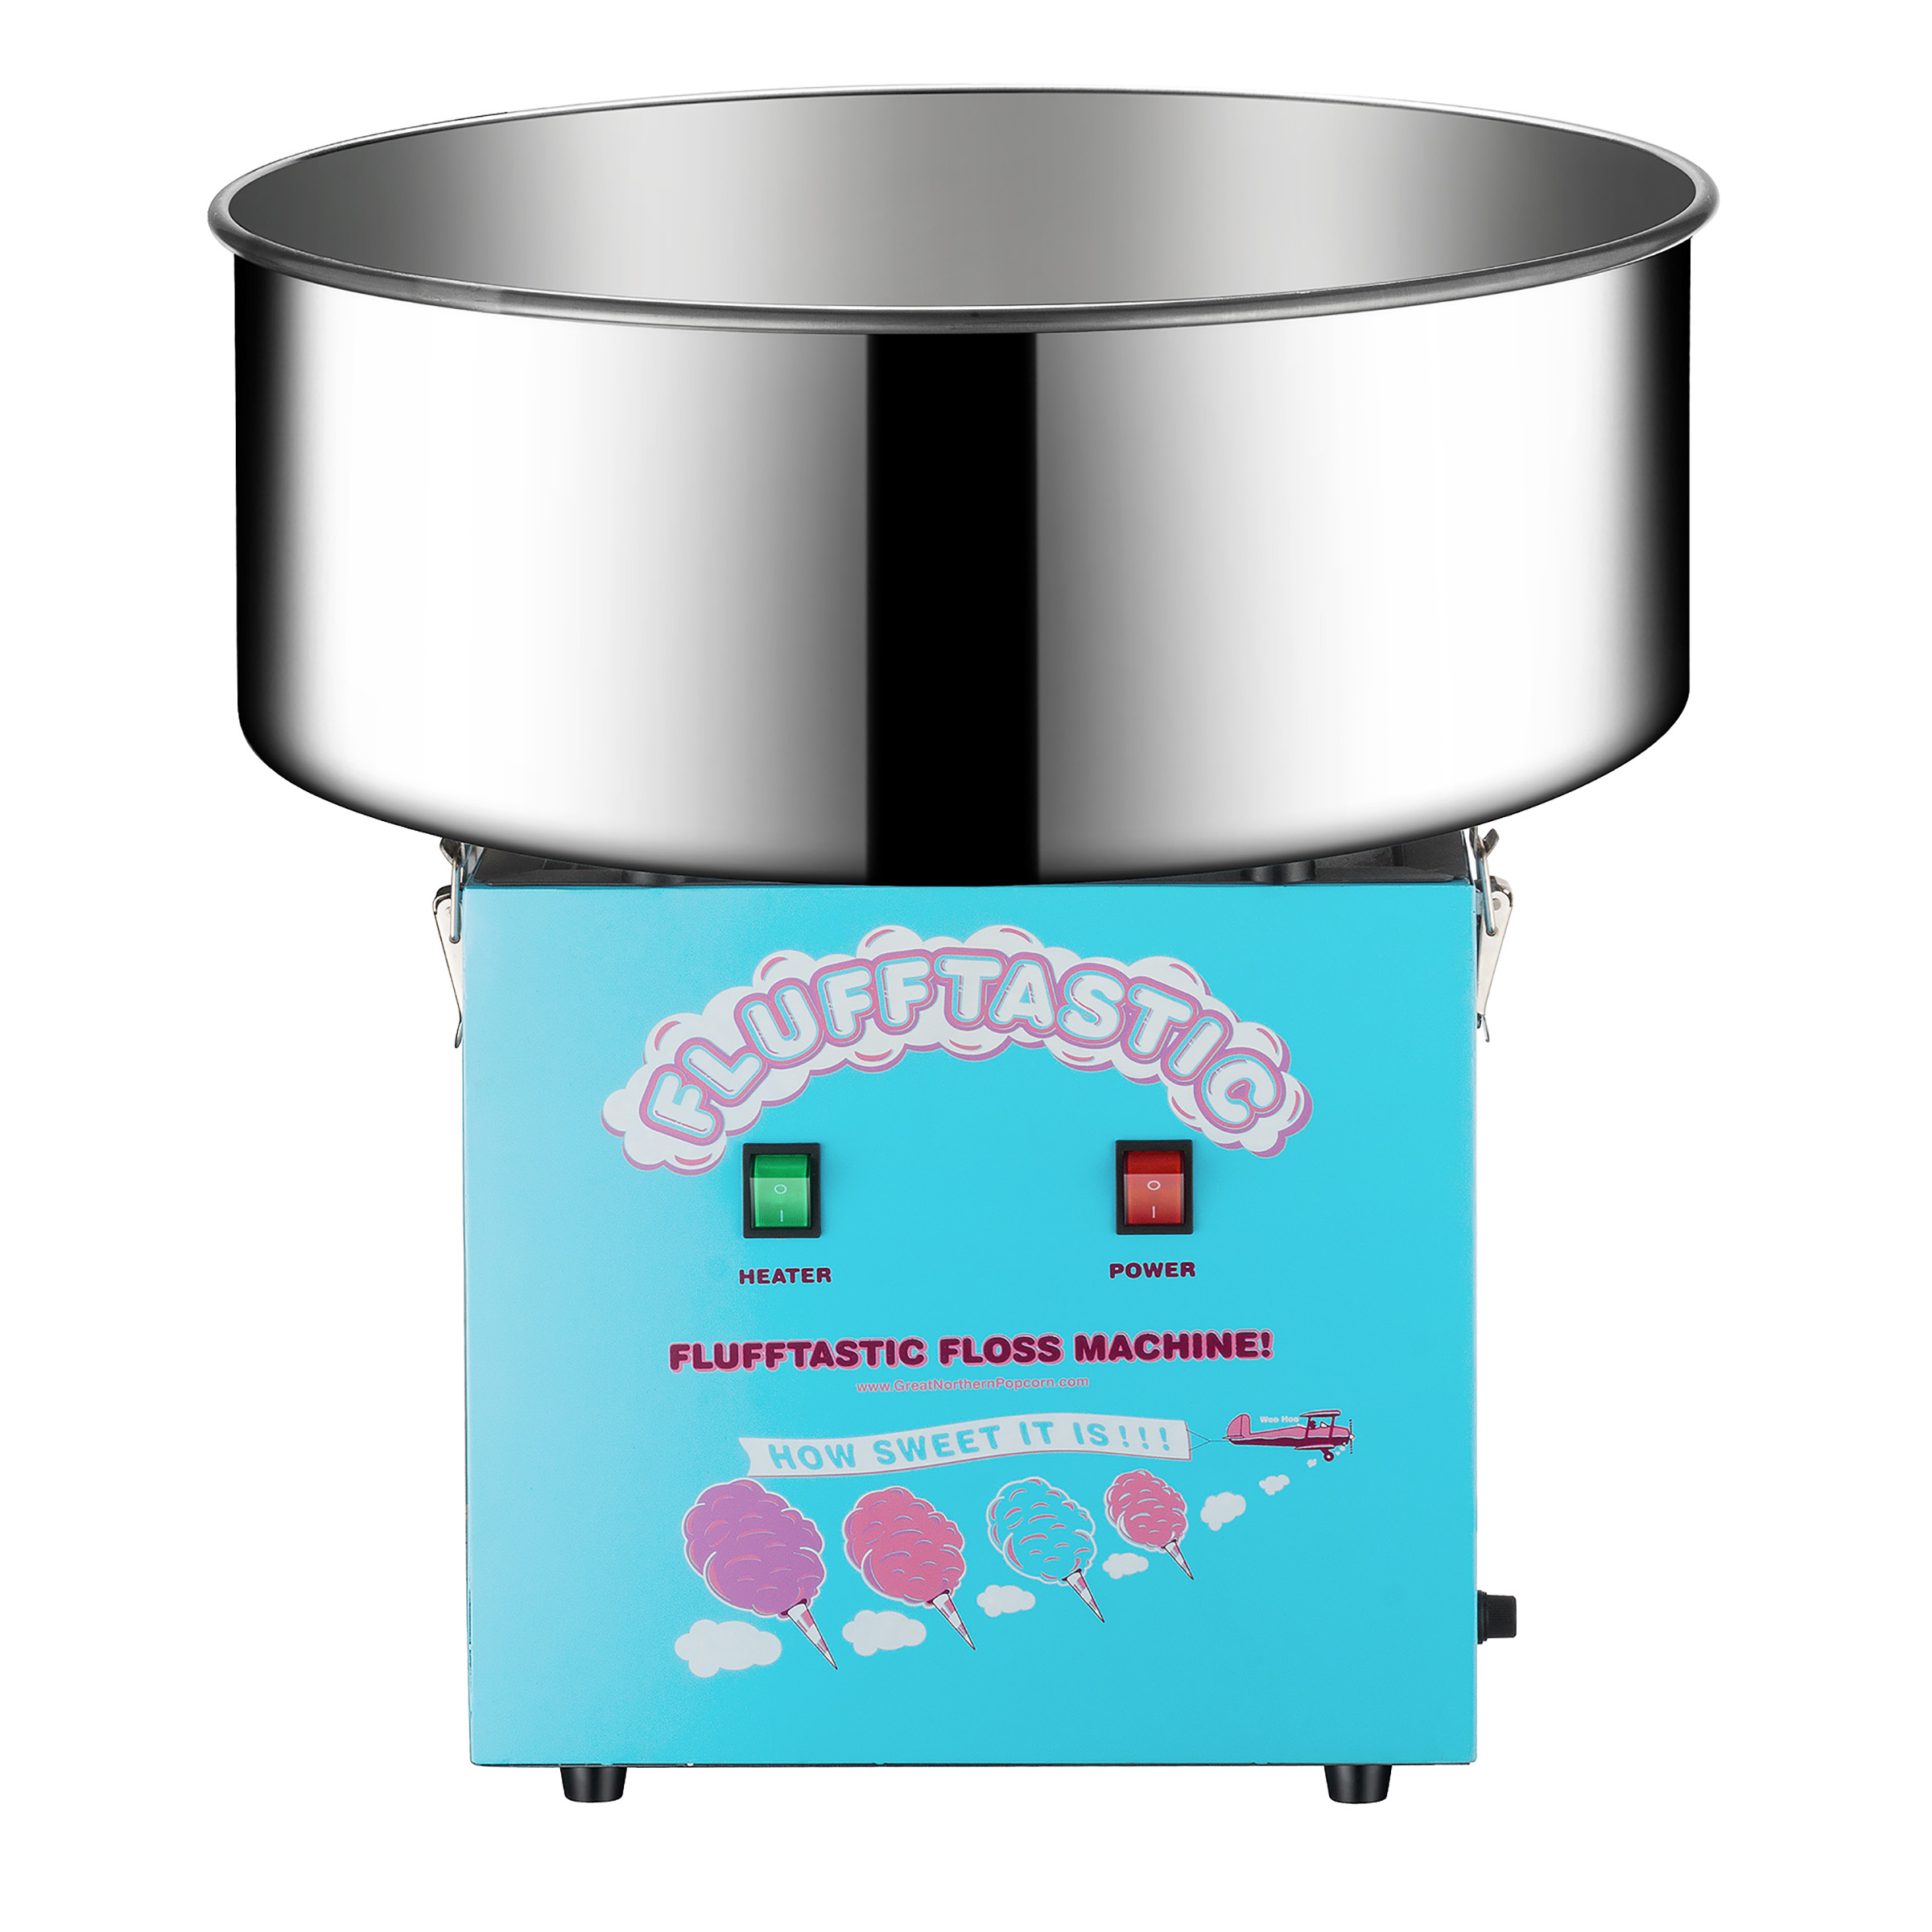 Great Northern Cotton Candy Machine "Flufftastic" Floss Maker Electric, Blue - image 2 of 8